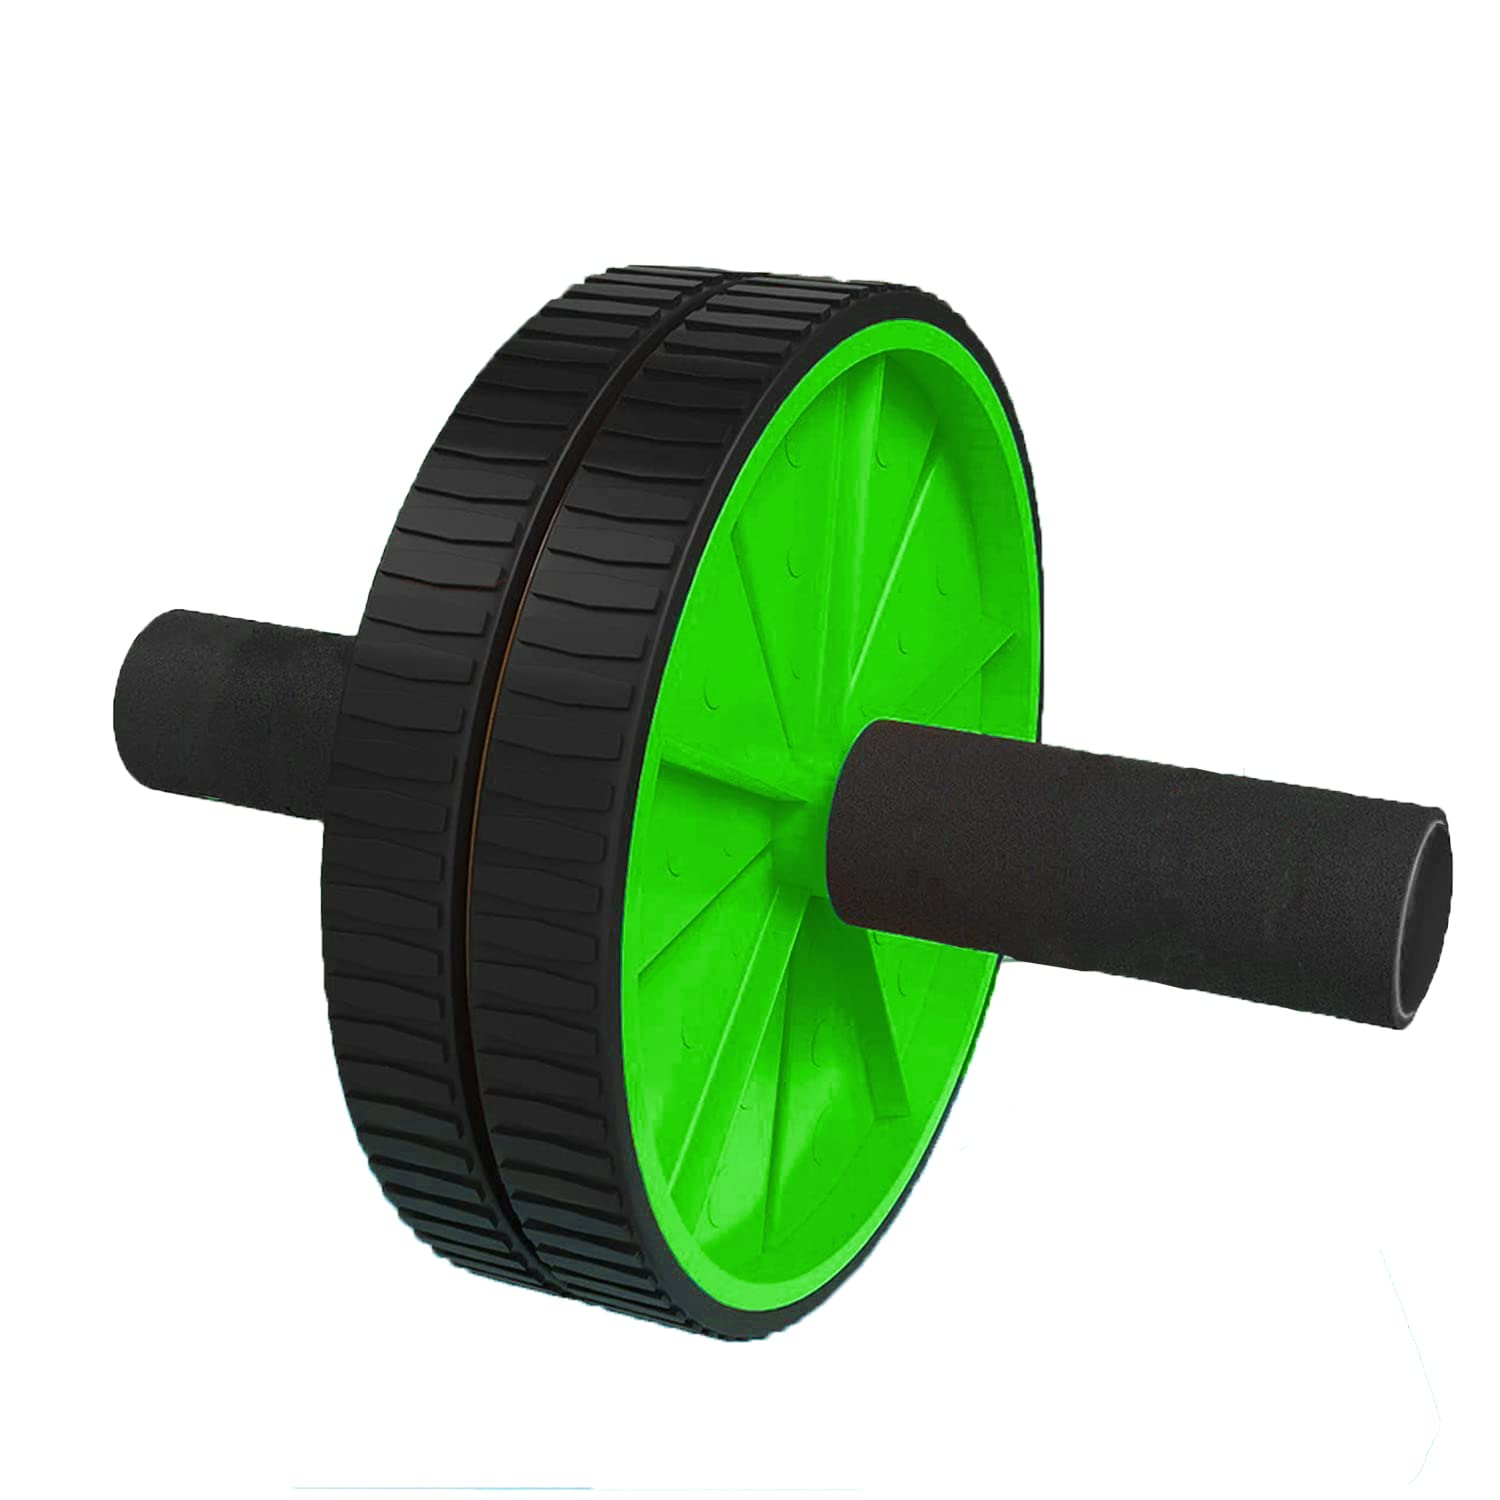 Strauss Premium Exercise Wheel Ab Roller with Foam Handles, (Green)